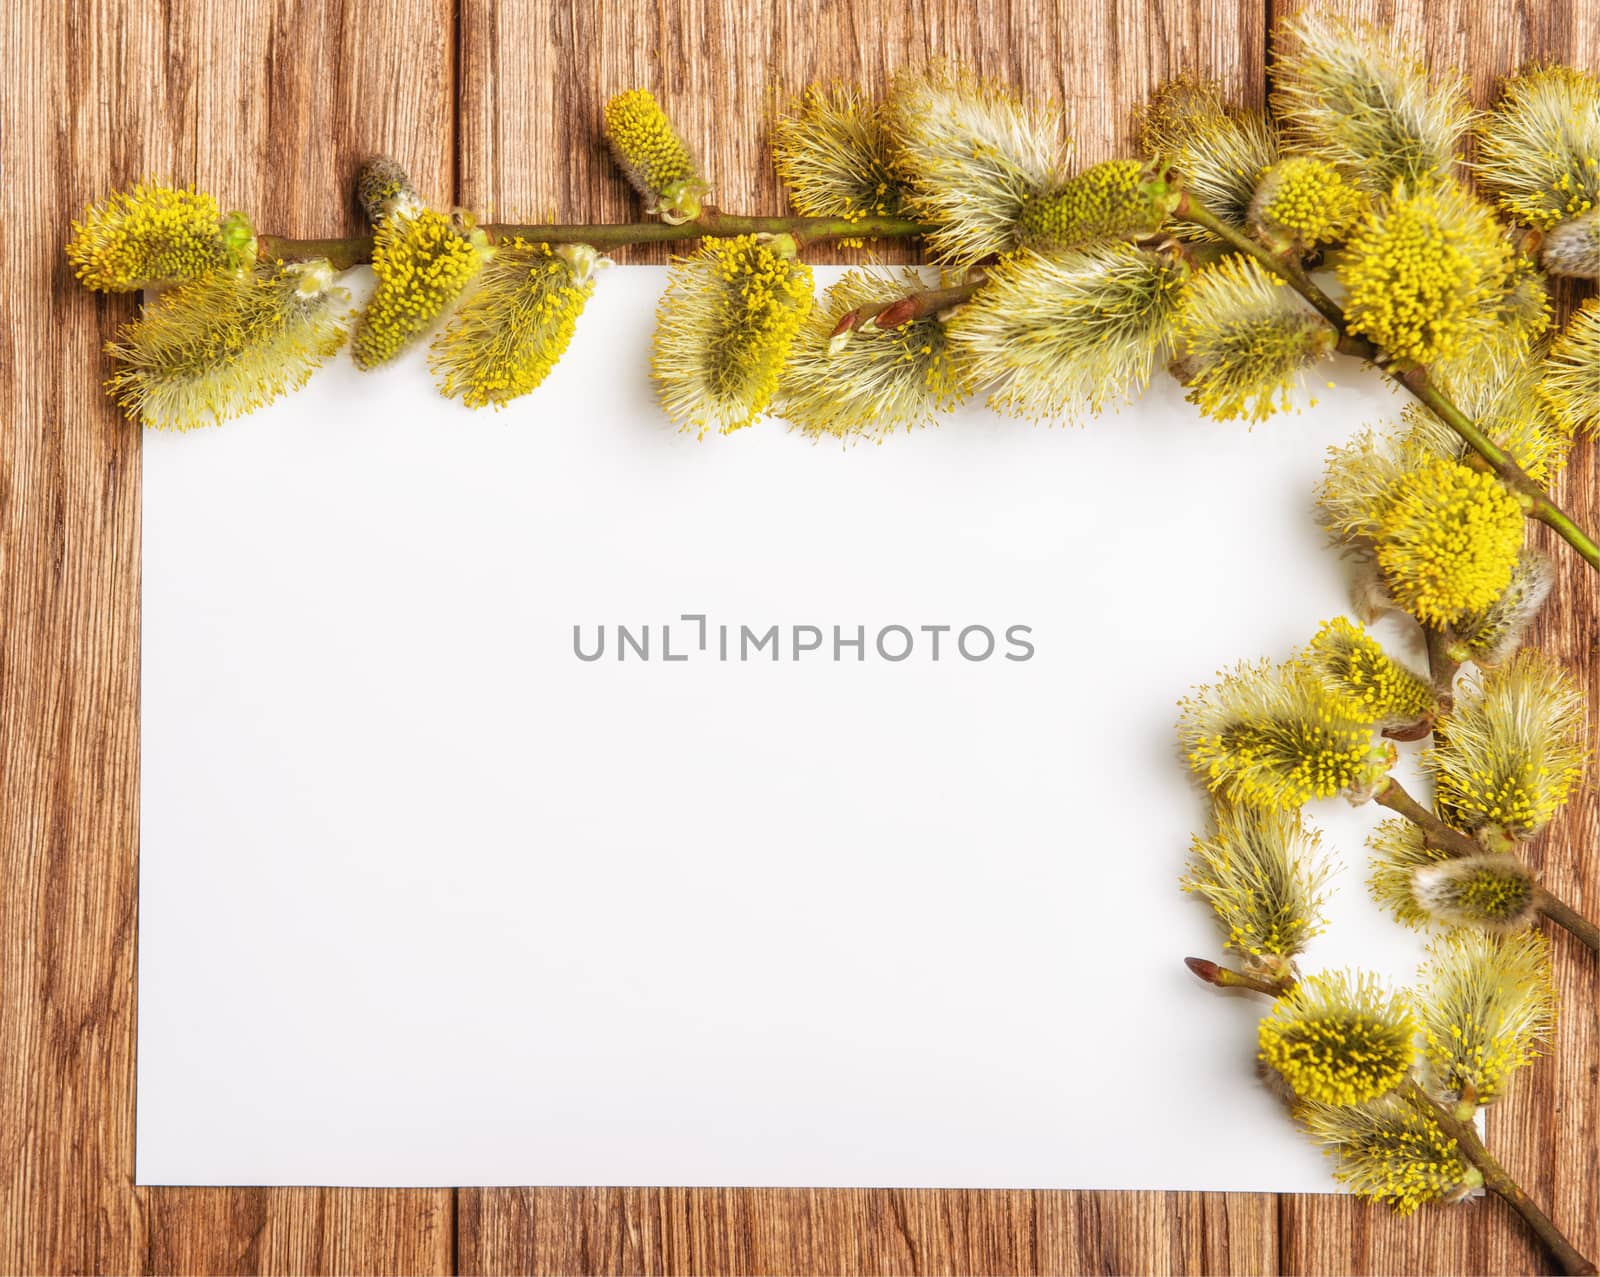 willow catkin branch on the old wooden table and paper blank